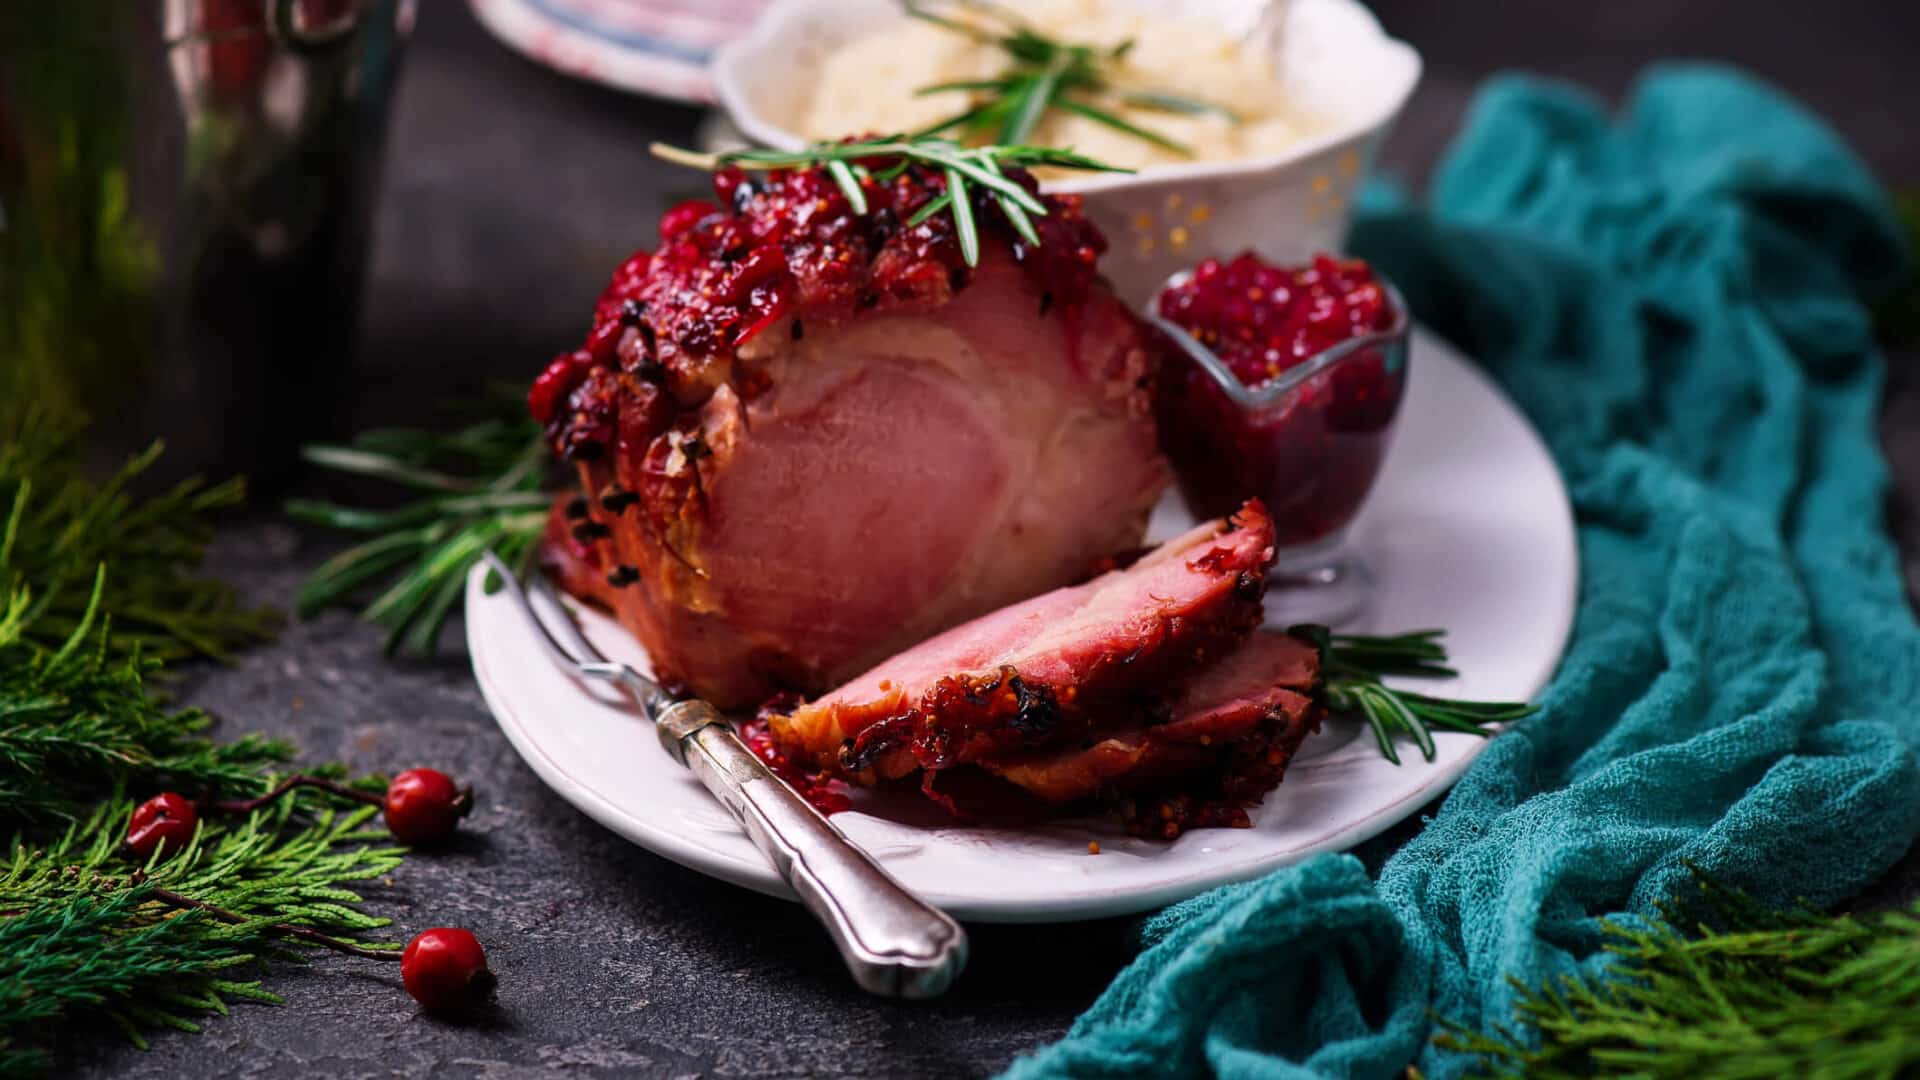 Baked Ham studded with cloves, drizzed with a cranberry glaze, and granished with rosemary